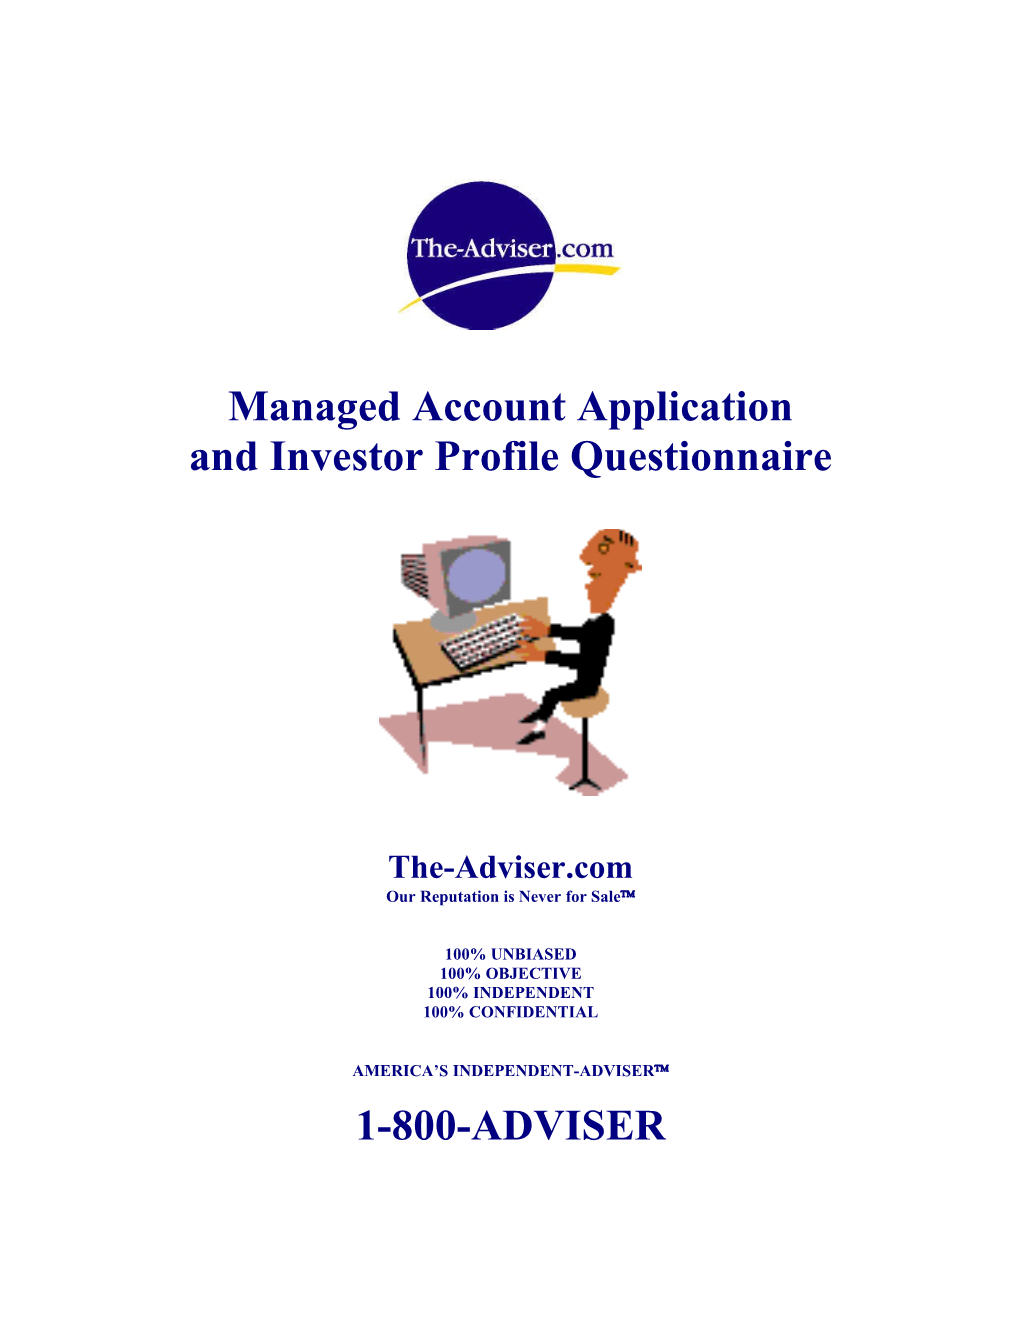 And Investor Profile Questionnaire